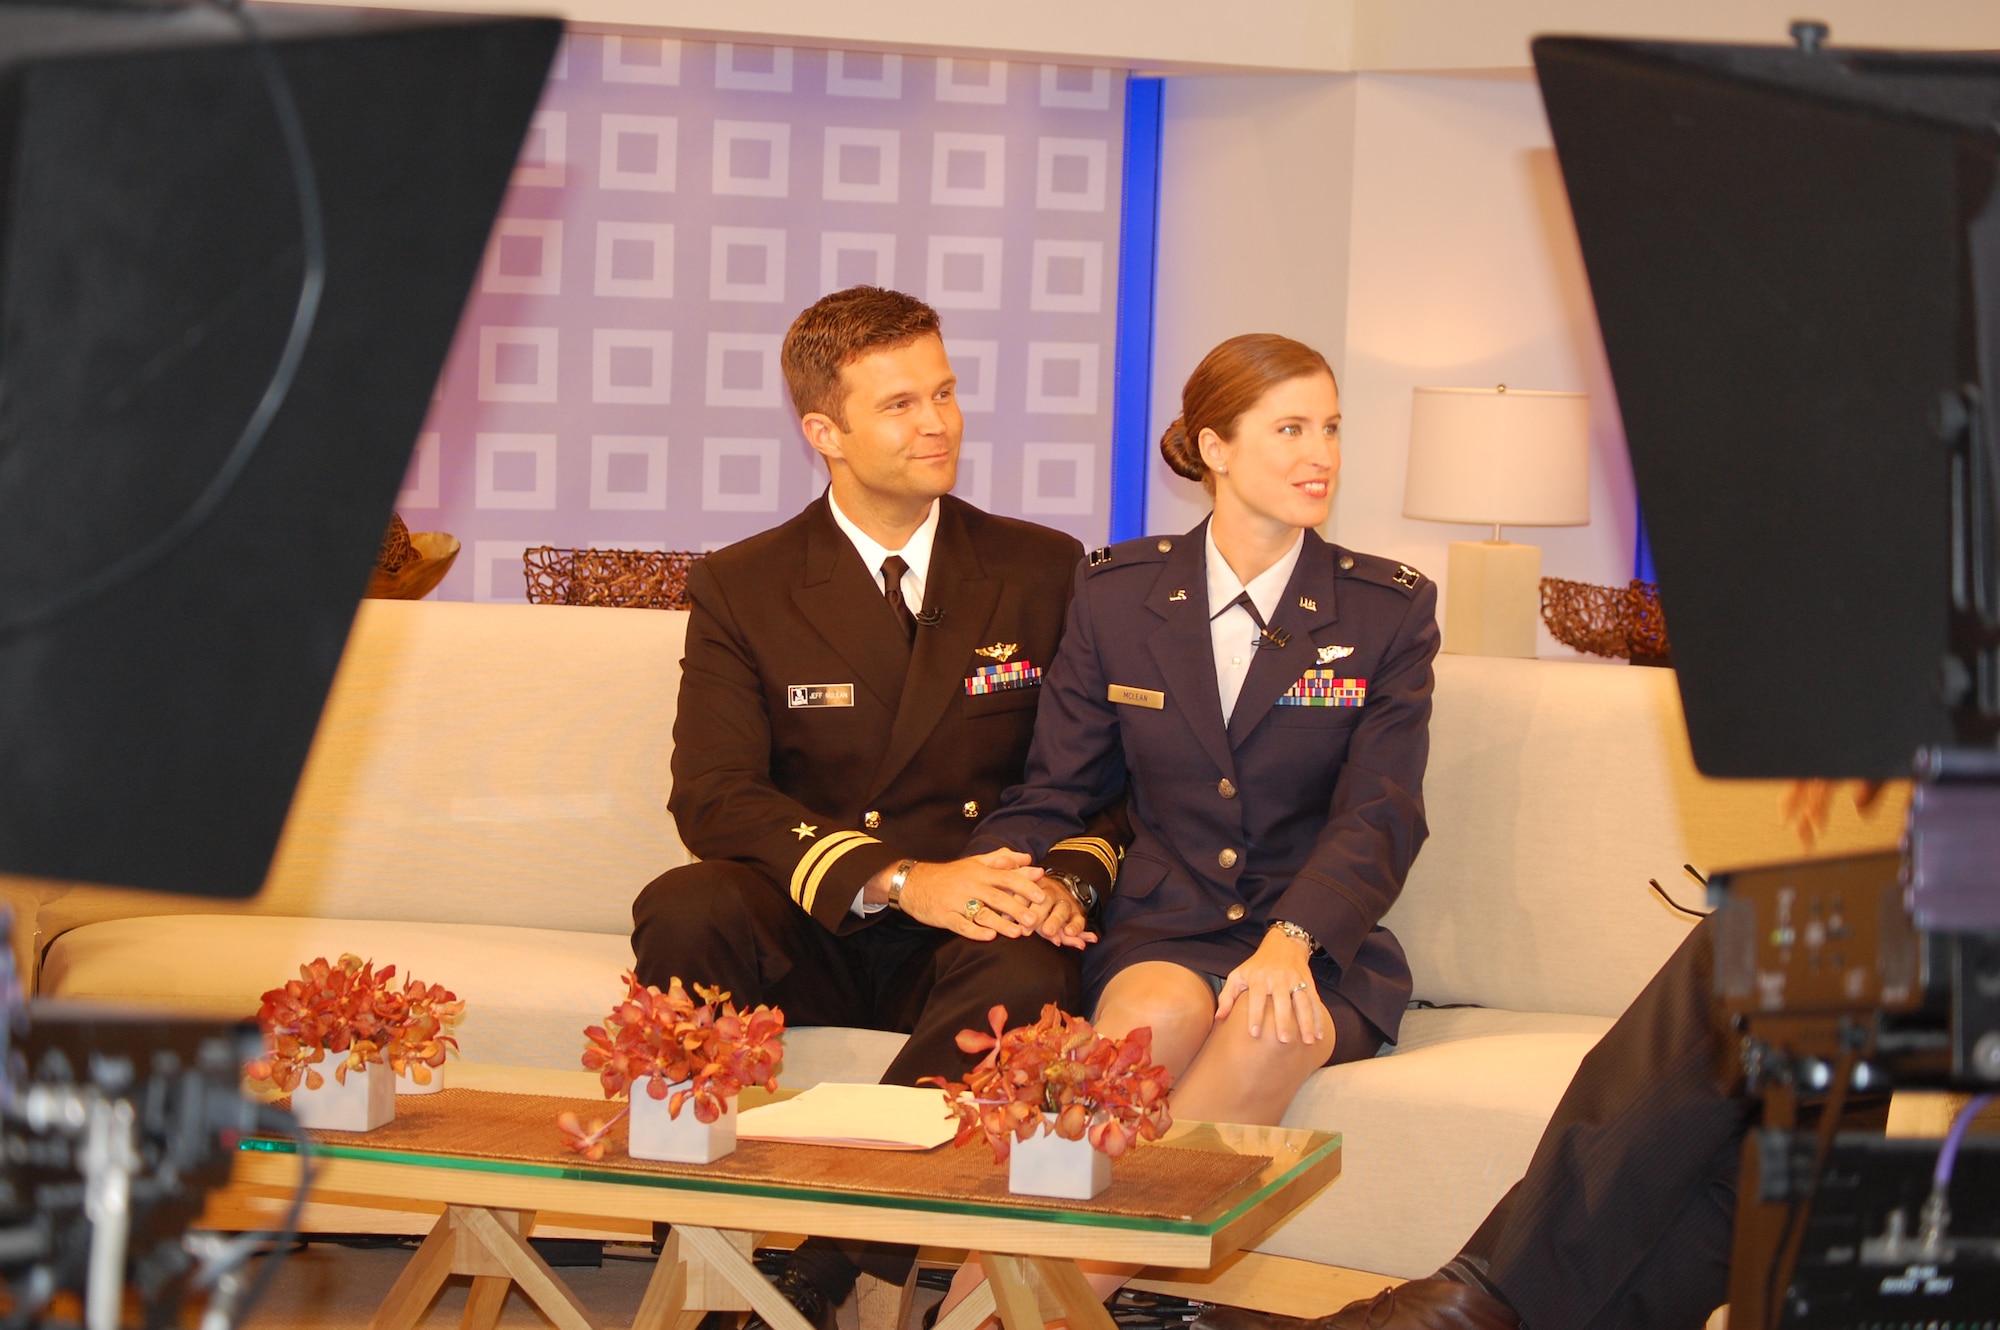 Navy Lt. Jeff McLean and wife, Air Force Capt. Christine McLean are framed by the Today cameras during their in-studio interview on Sunday, Aug. 1. (USAF photo by Maj. Shannon Mann, 916ARW/PA)